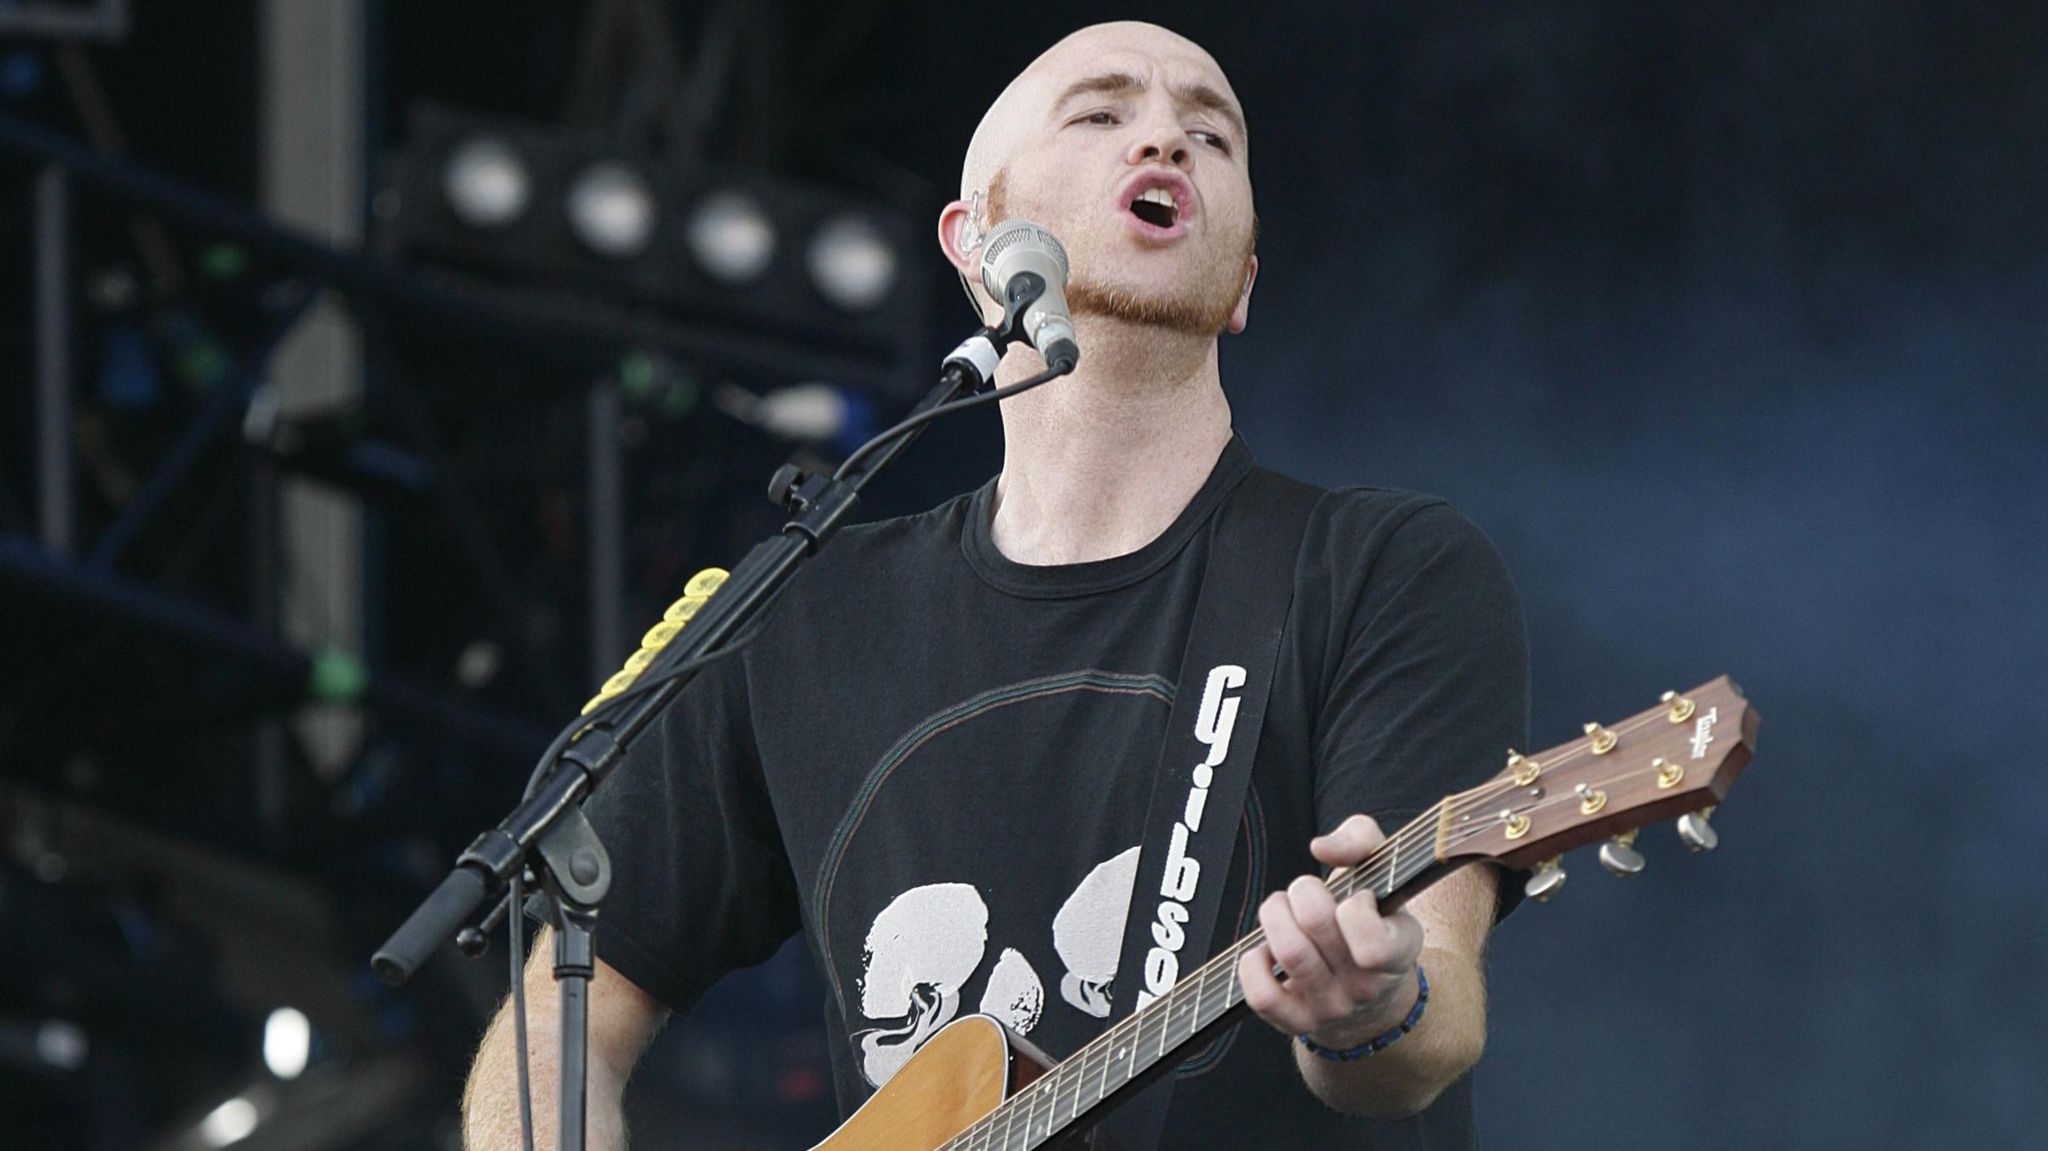 The late Mark Sheehan of The Script on stage